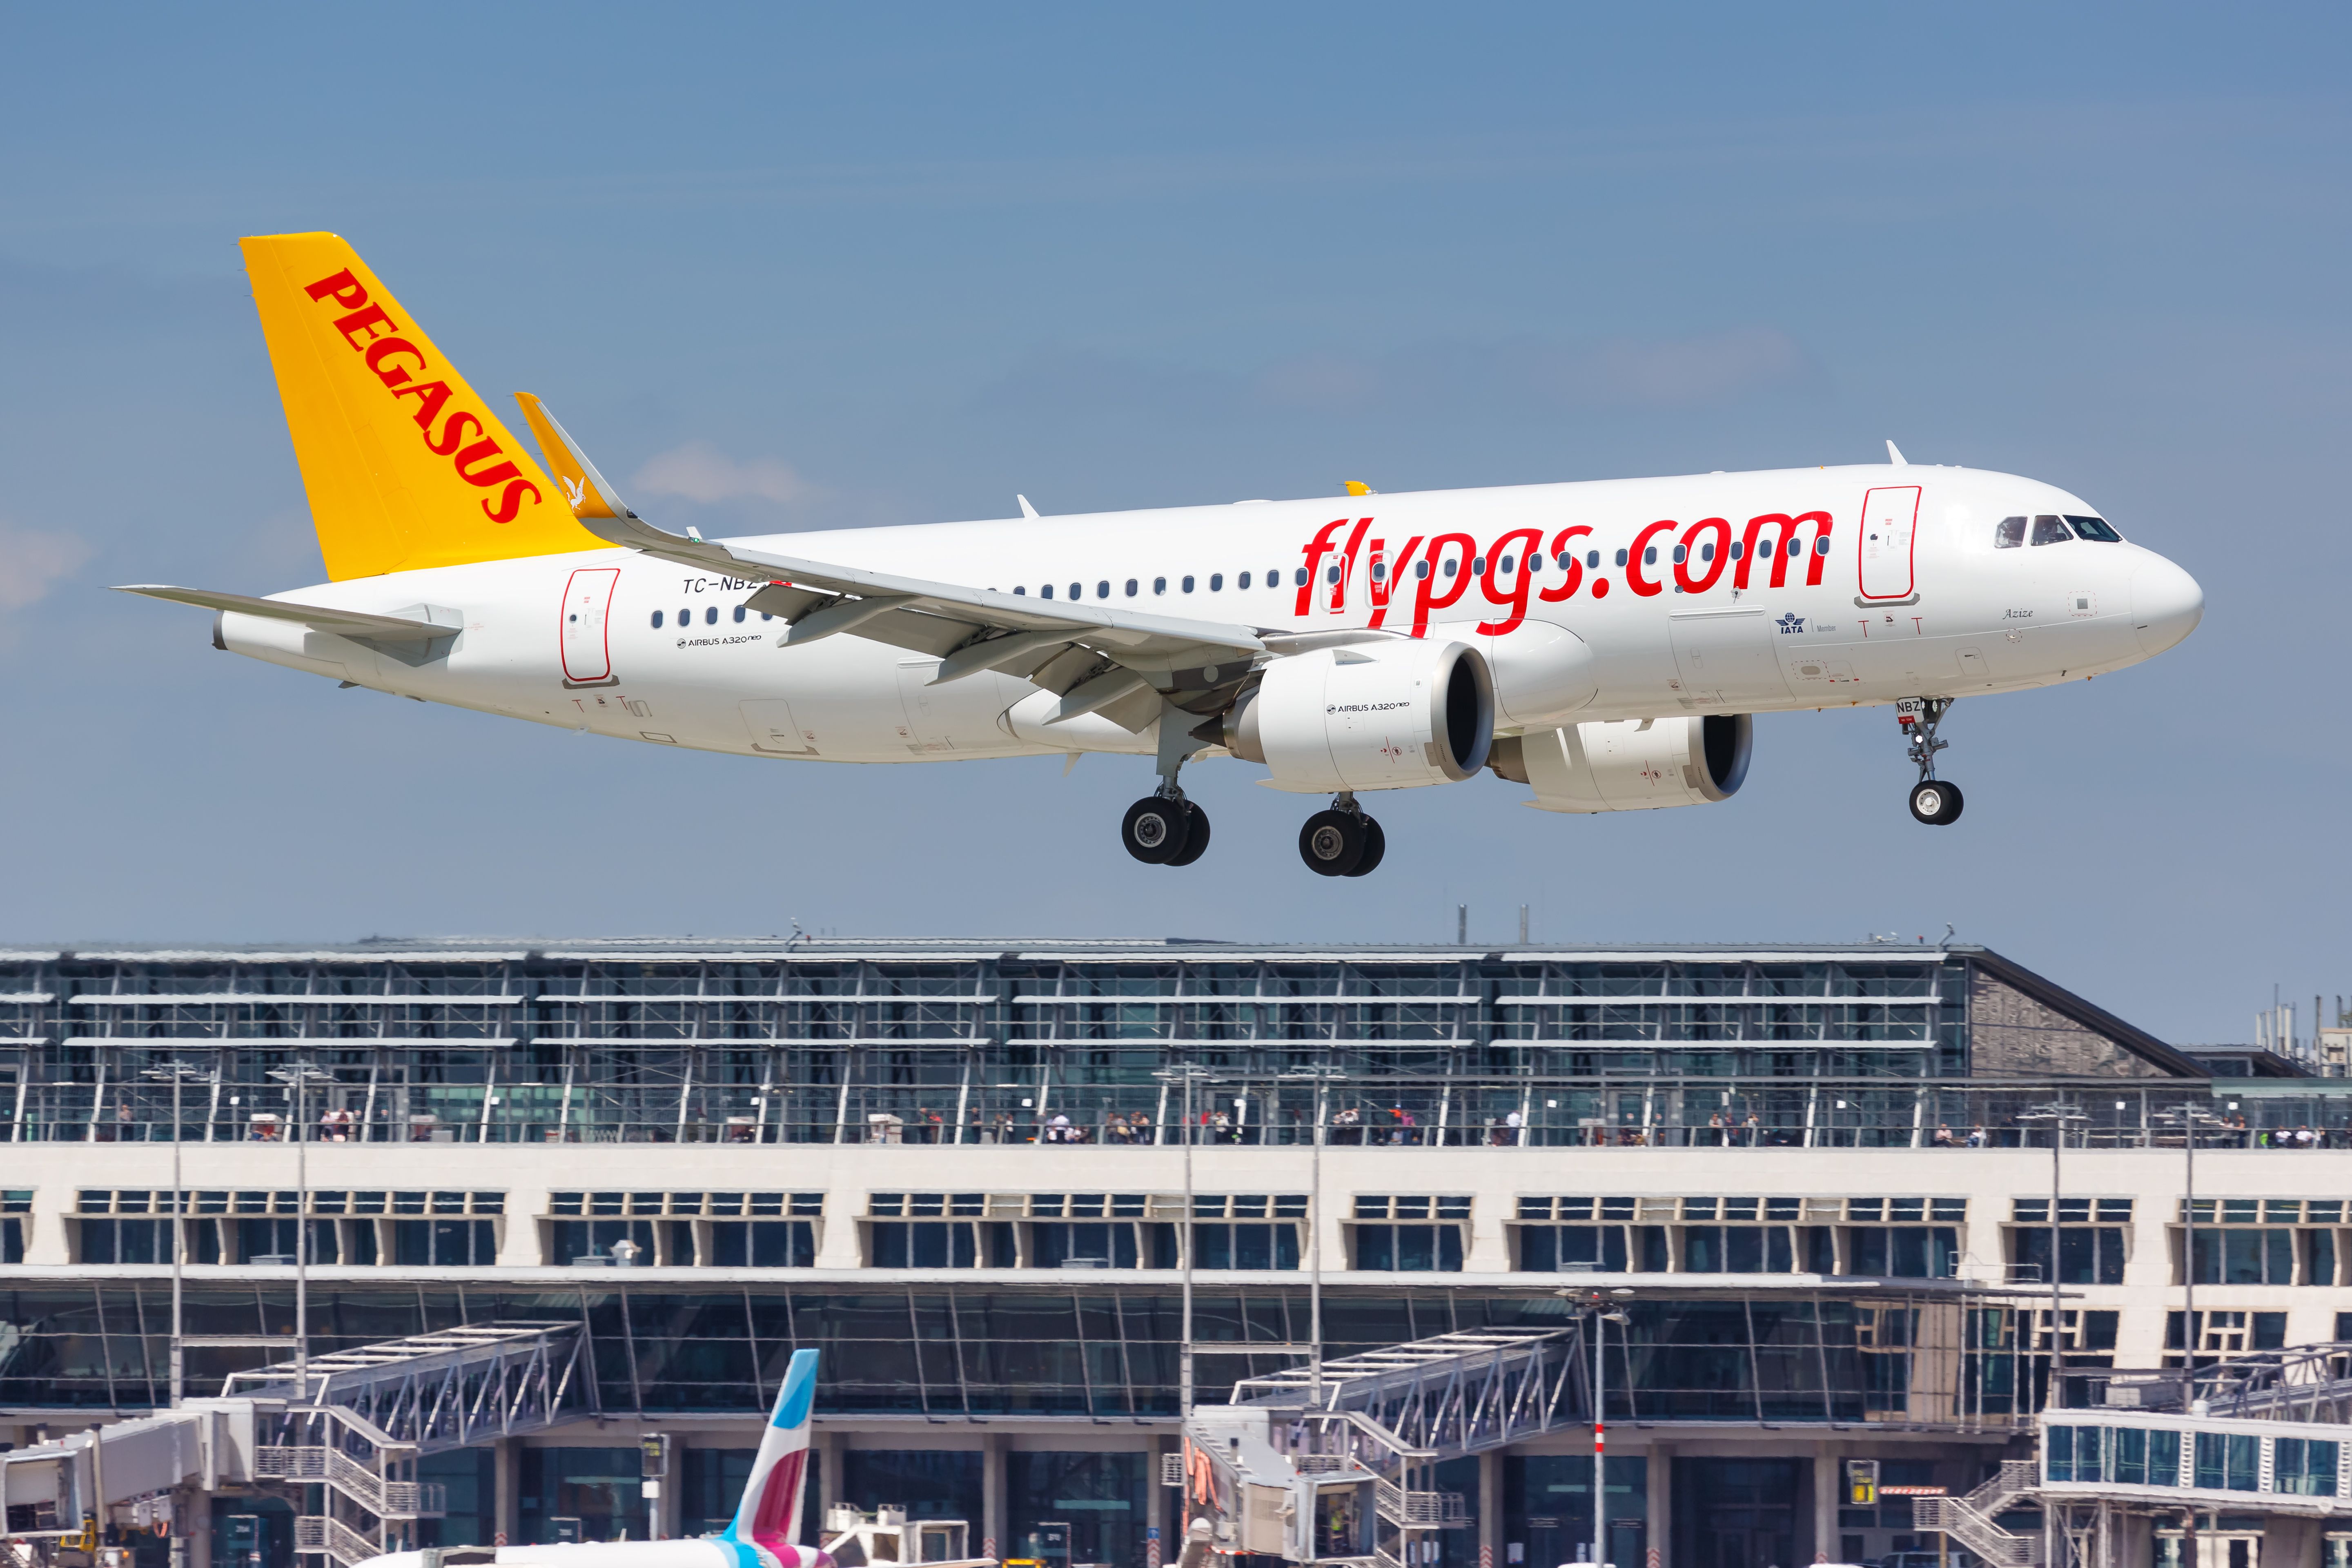 A Pegasus Airlines aircraft in Germany